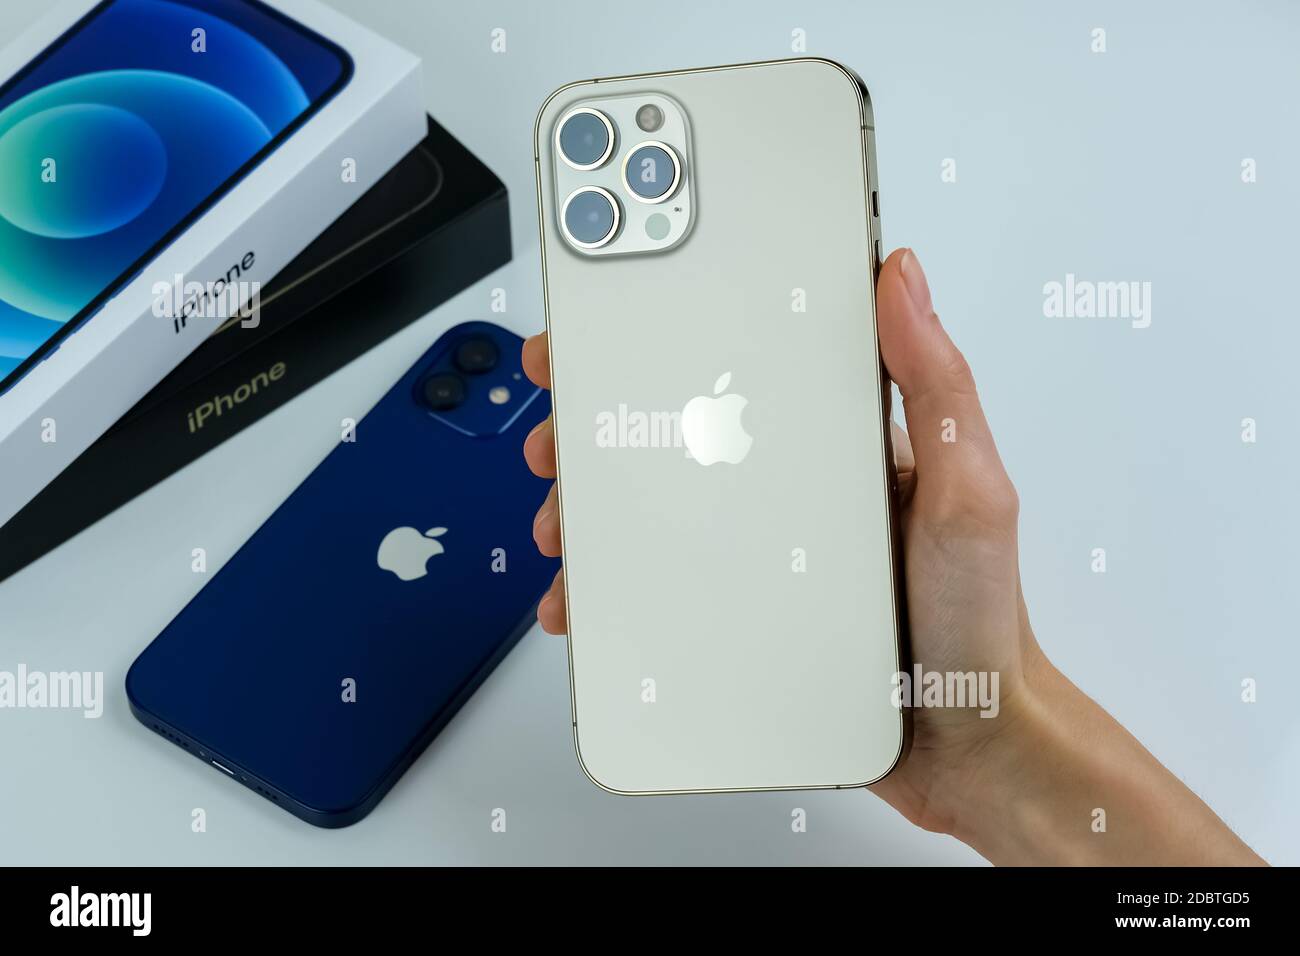 iPhone 12 Pro Max in Gold next to iPhone 12 in Blue on a white desk Stock Photo